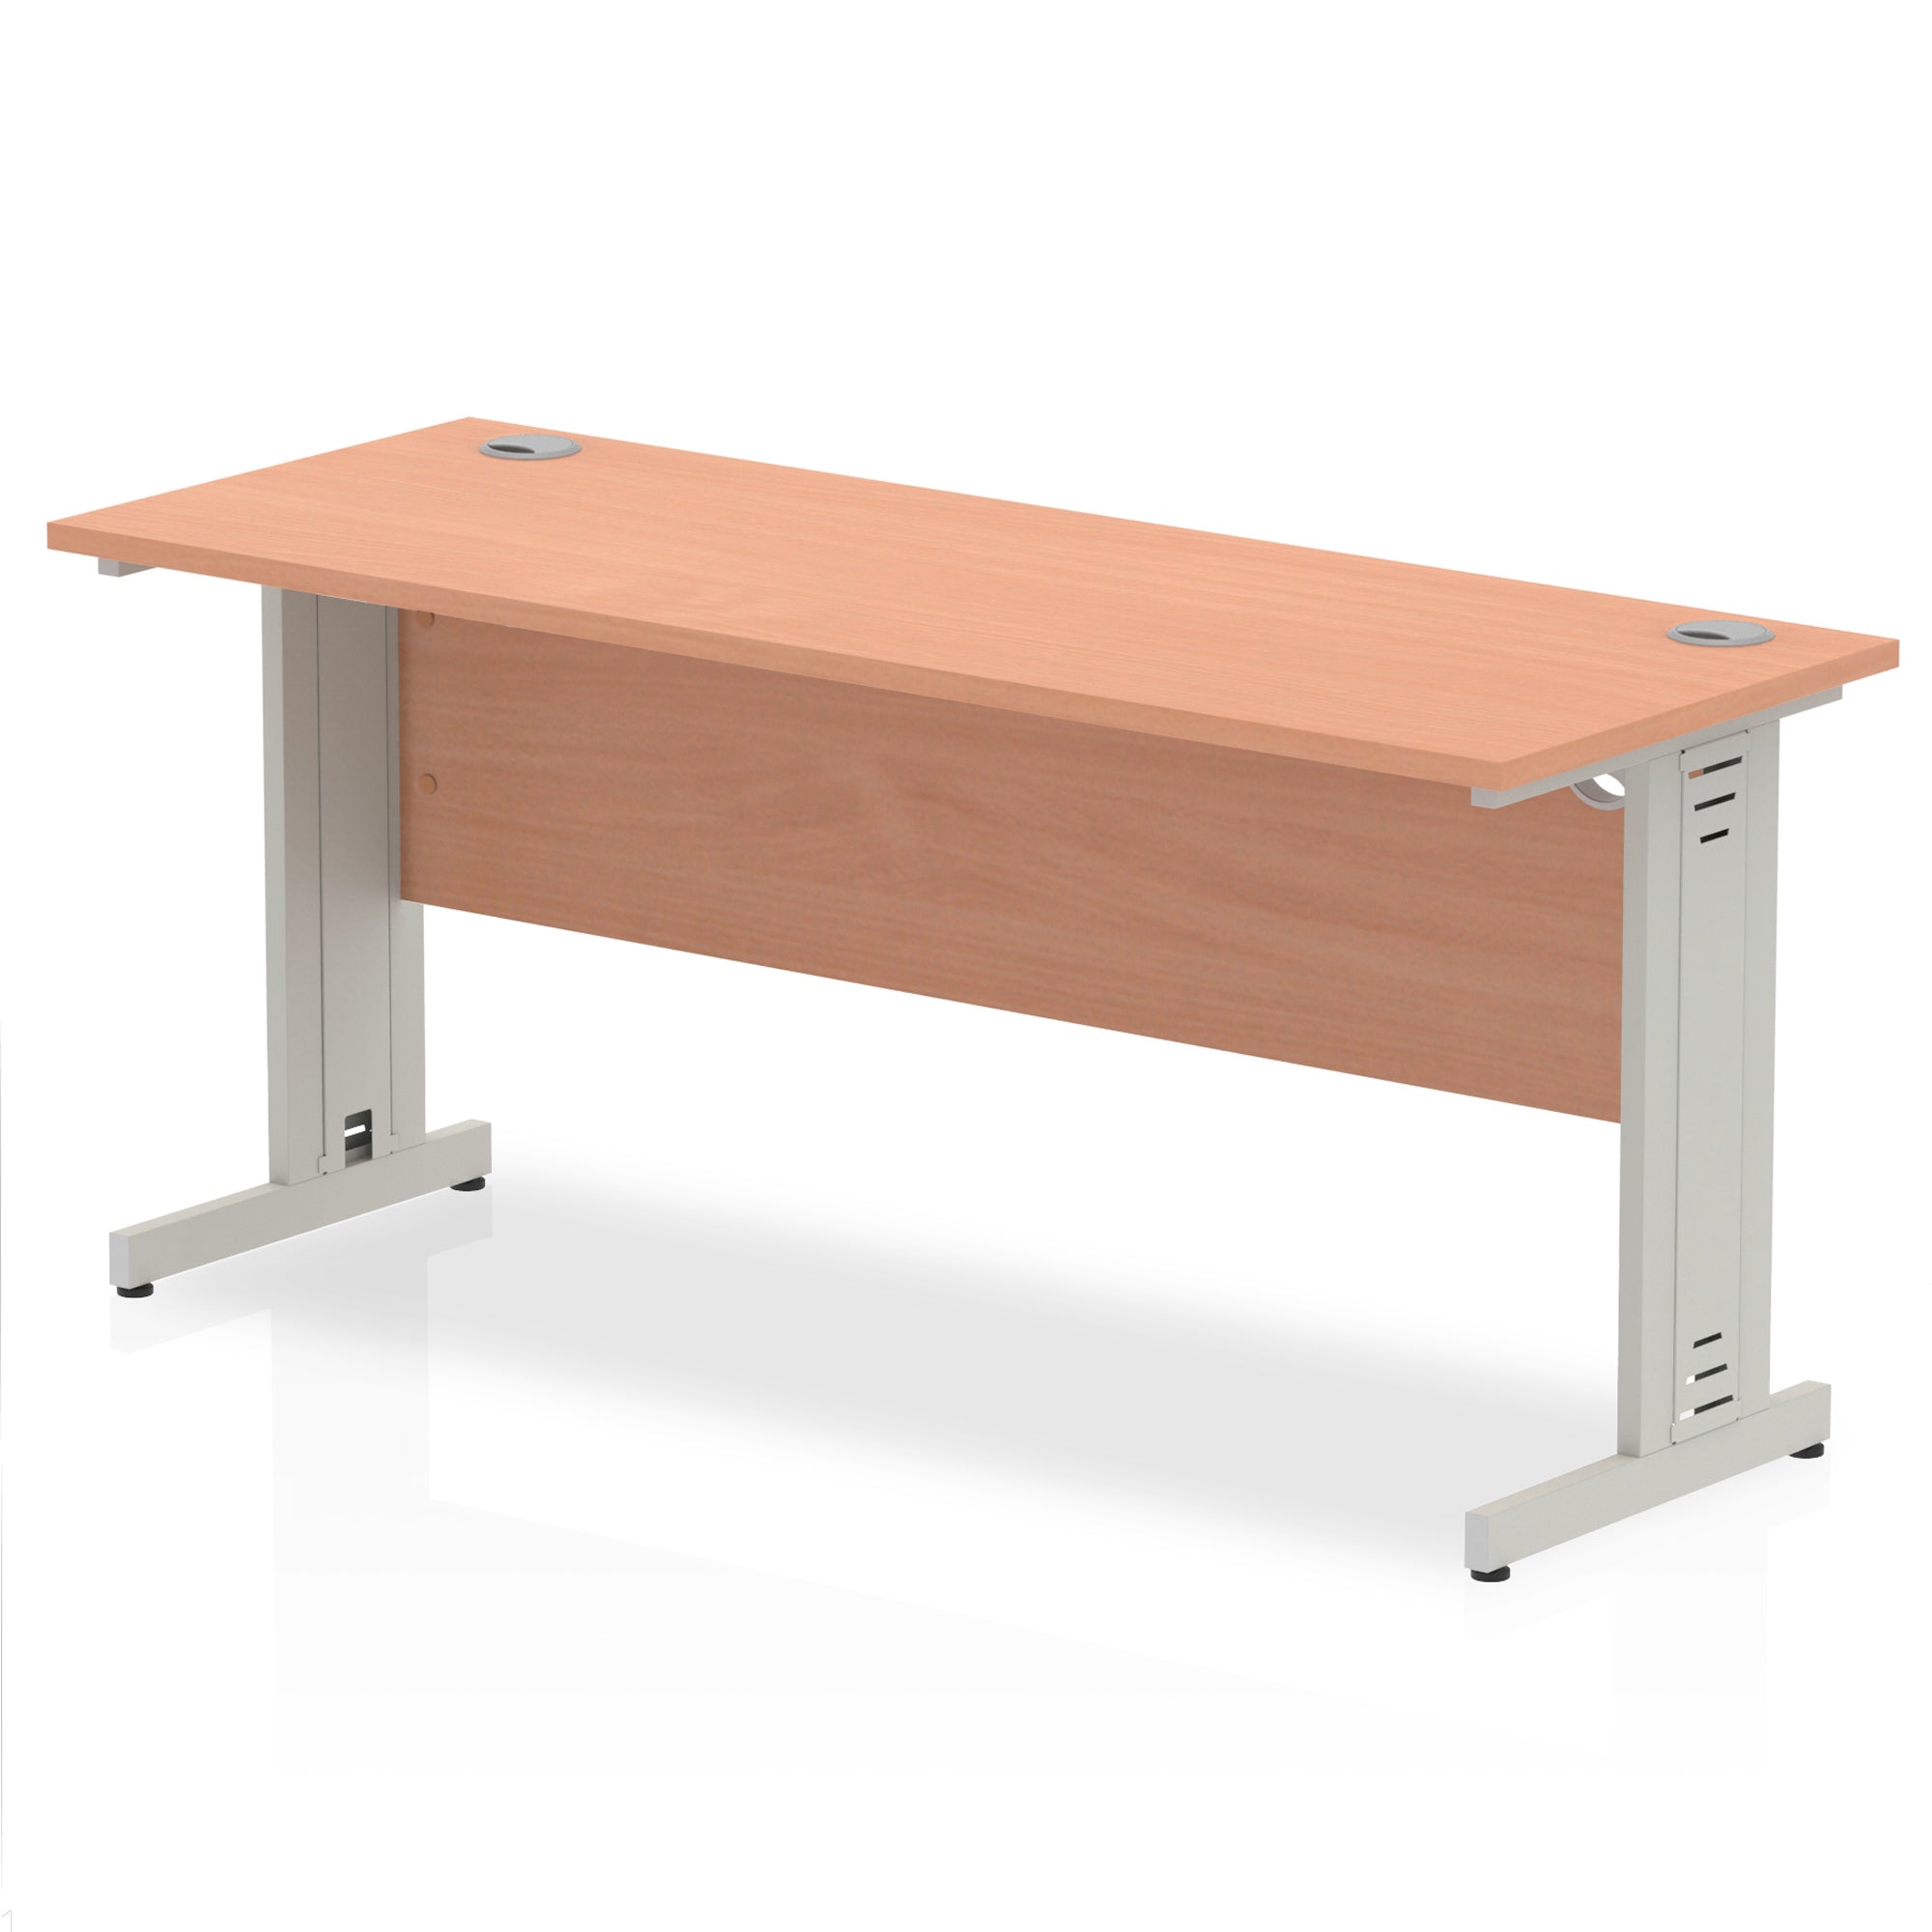 Impulse 1600mm Slimline Desk with Cable Managed Leg - MFC Rectangular Table, Self-Assembly, 5-Year Guarantee, Silver/White Frame